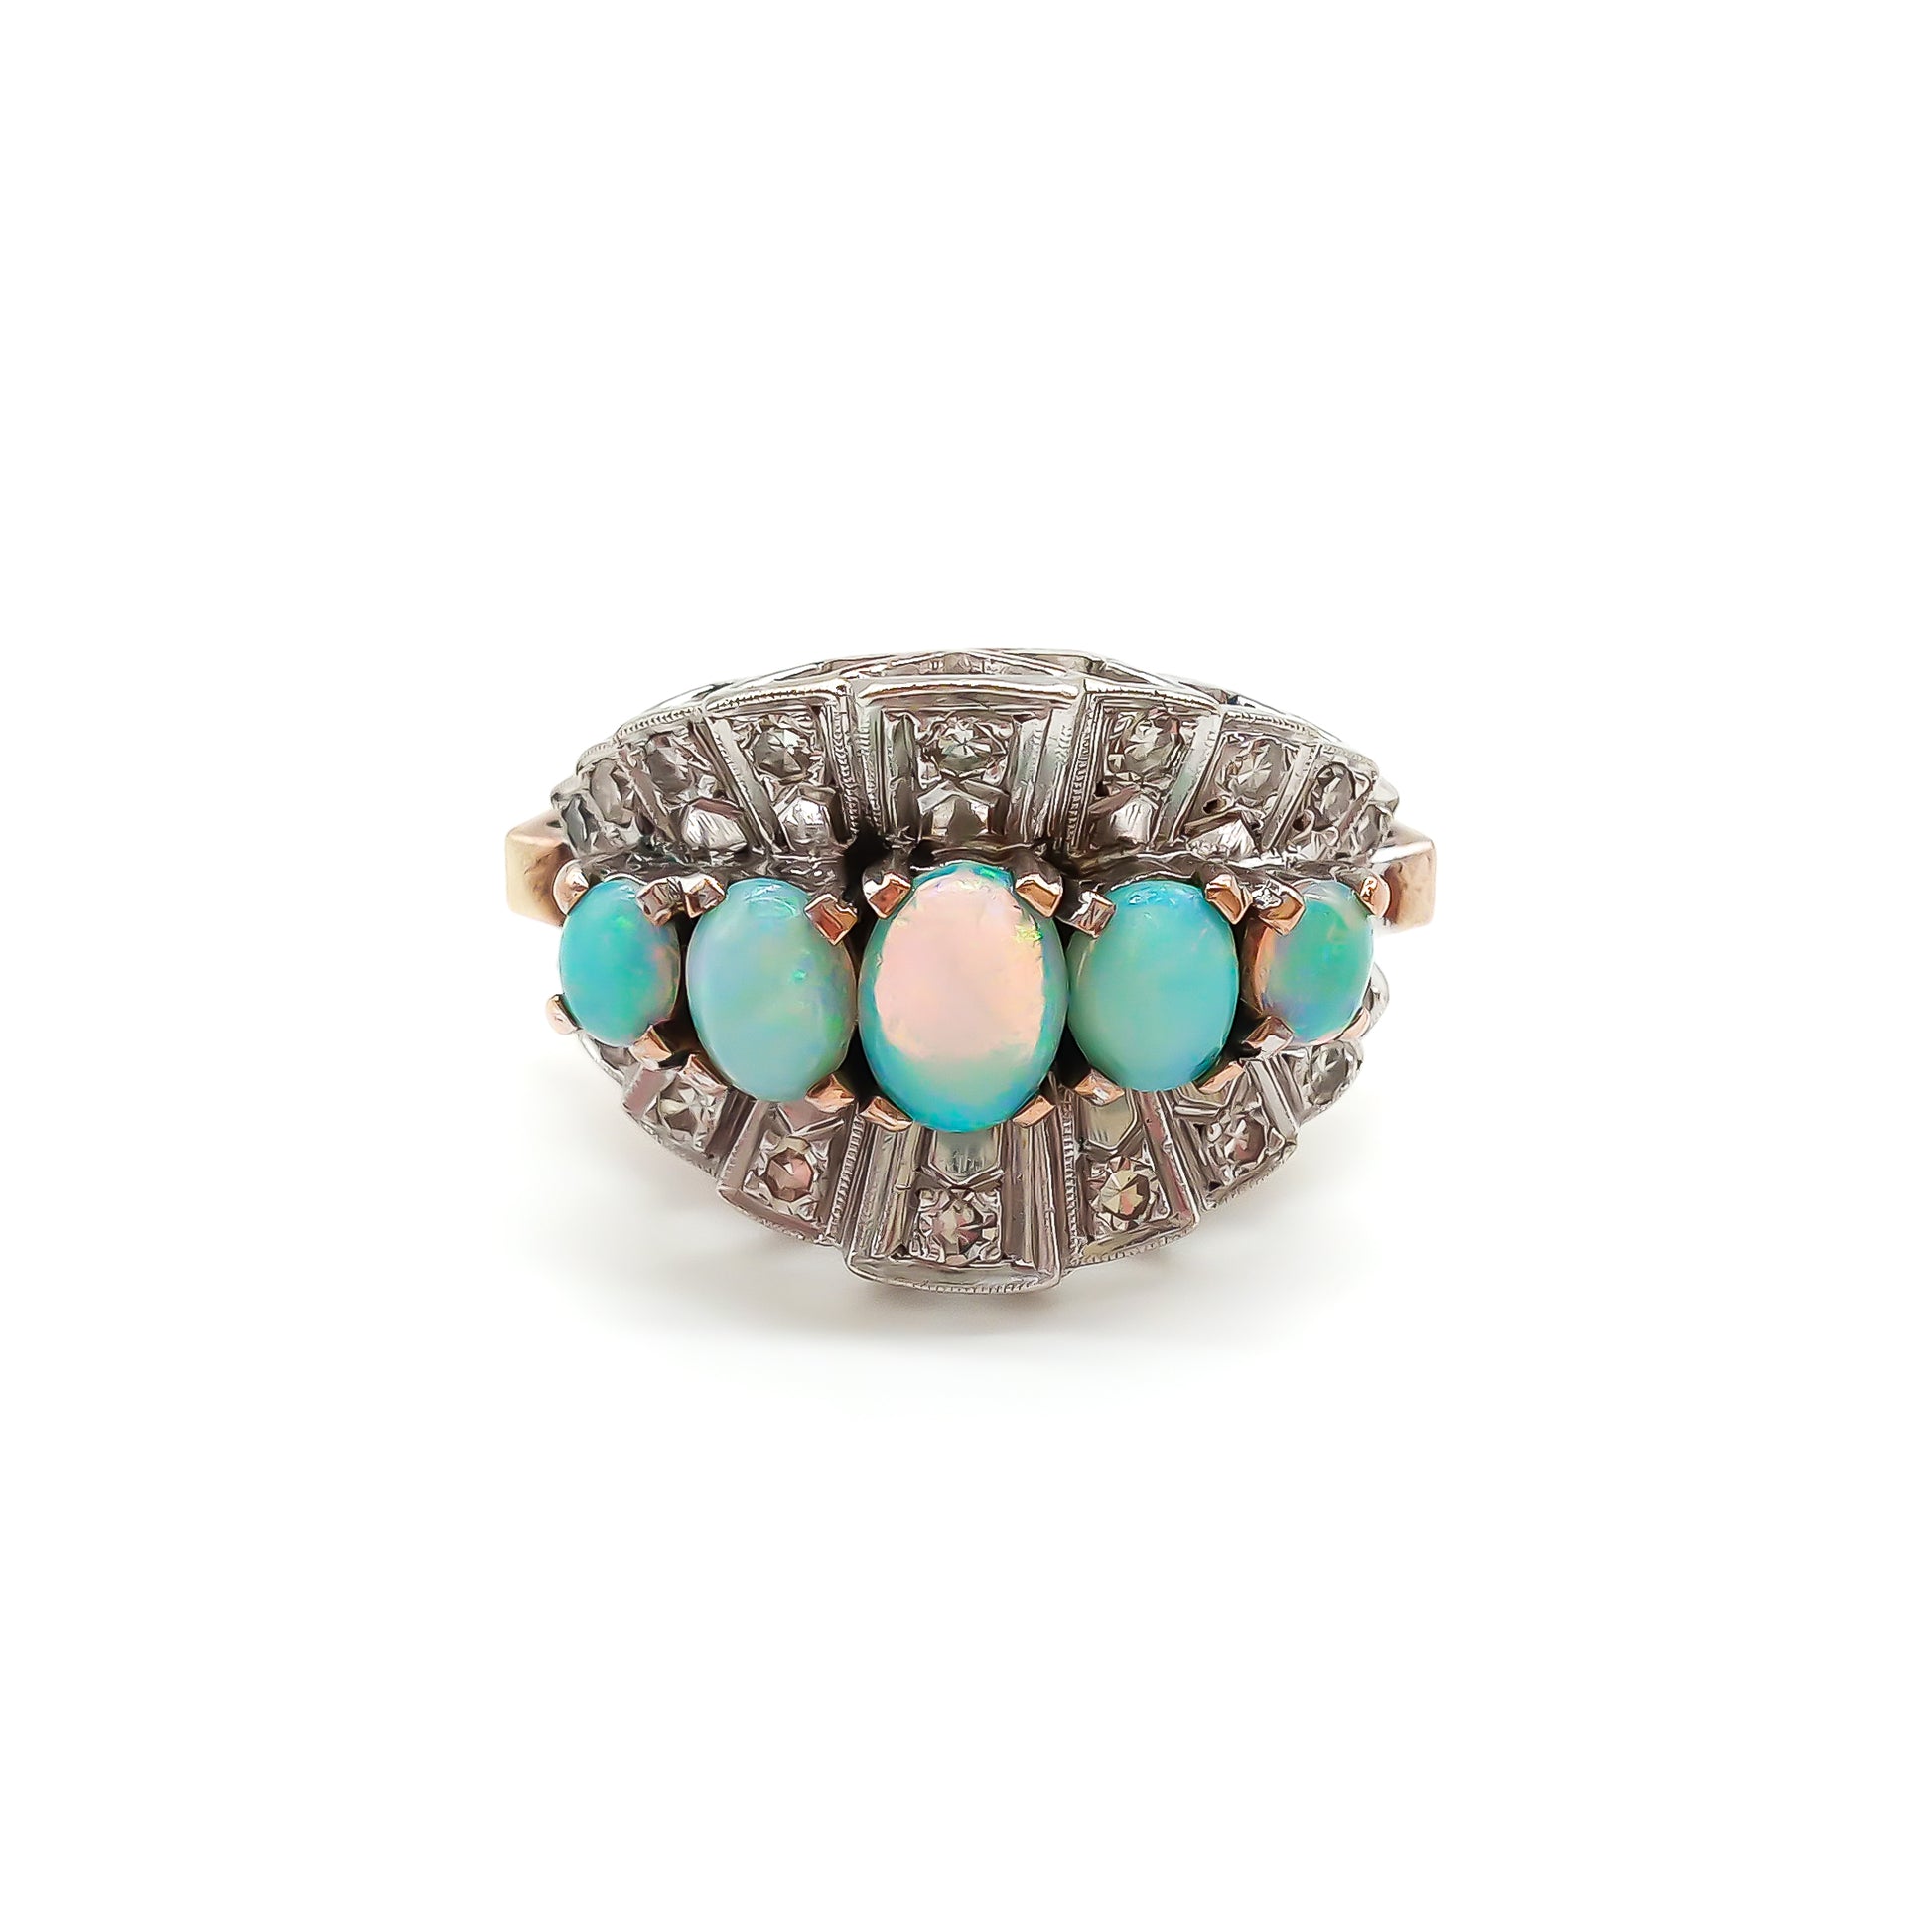 Gorgeous Art Deco 9ct rose and white gold diamond cocktail ring set with five luminescent oval opals.